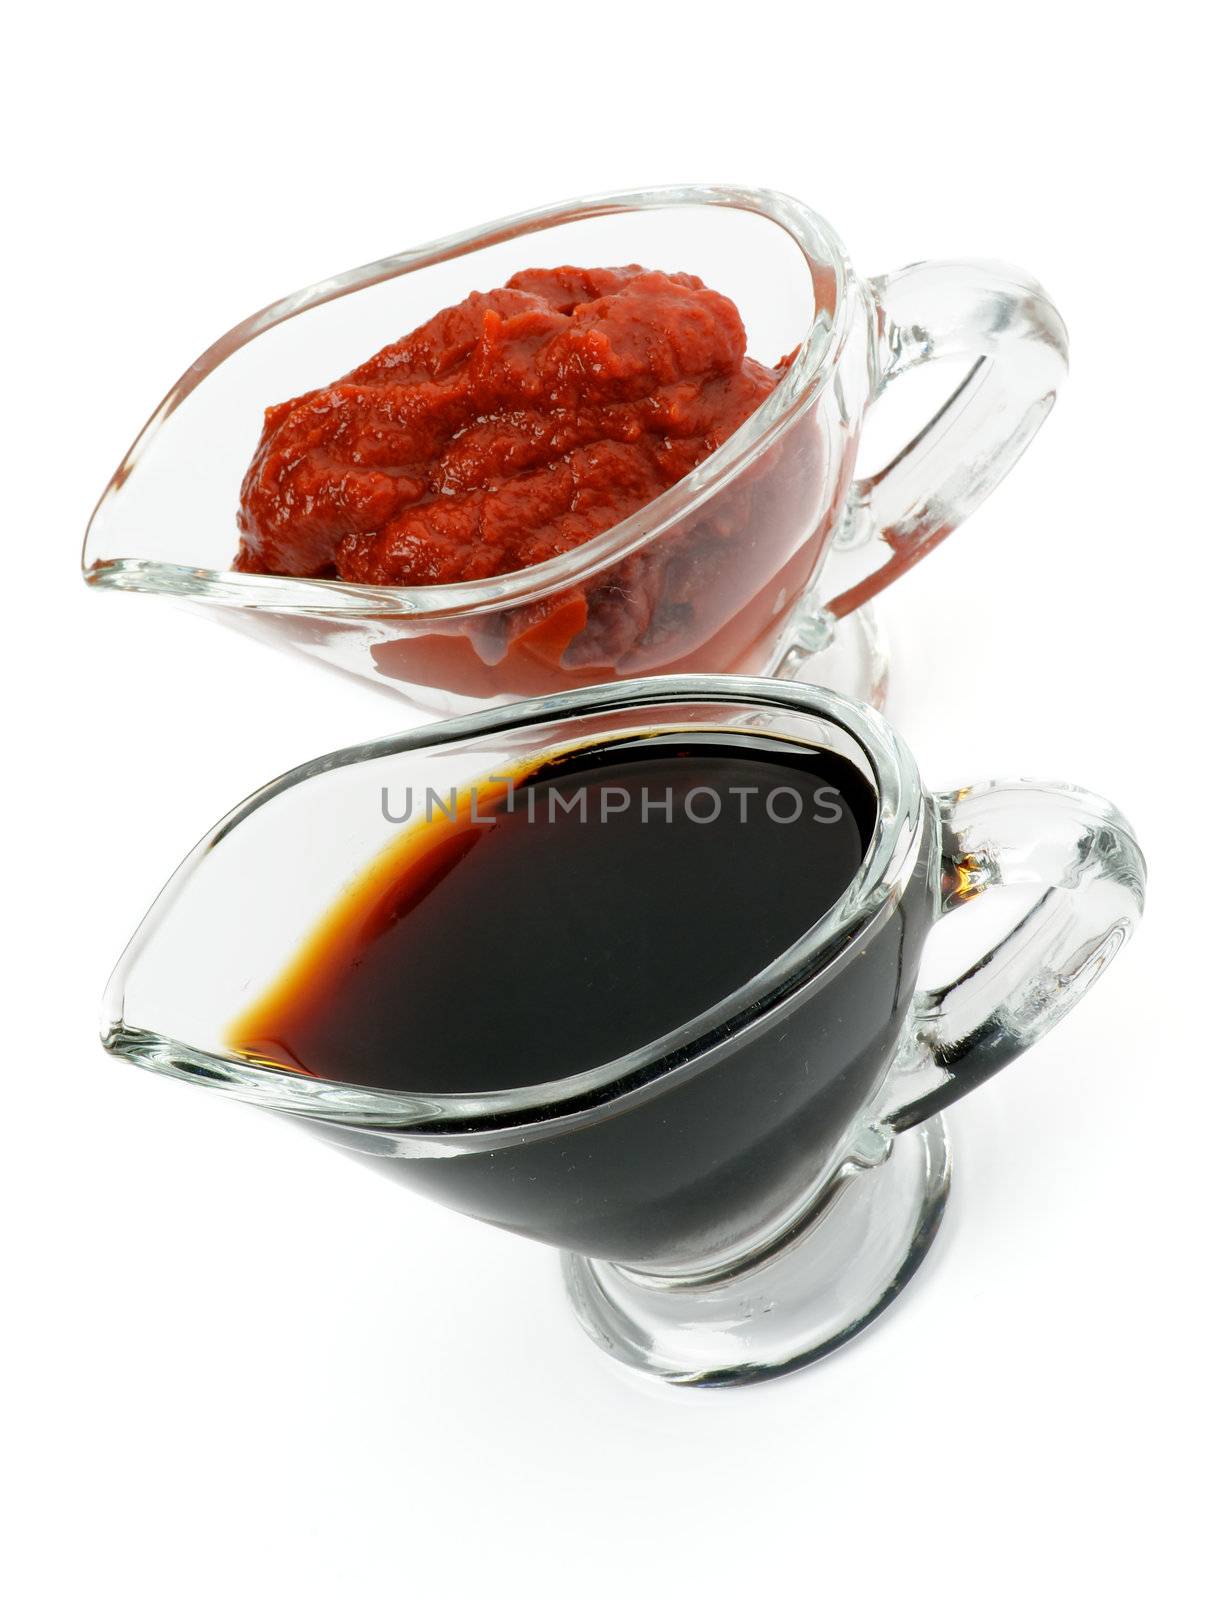 Arrangement of Soy Sauce and Ketchup in Glass Gravy Boat isolated on white background